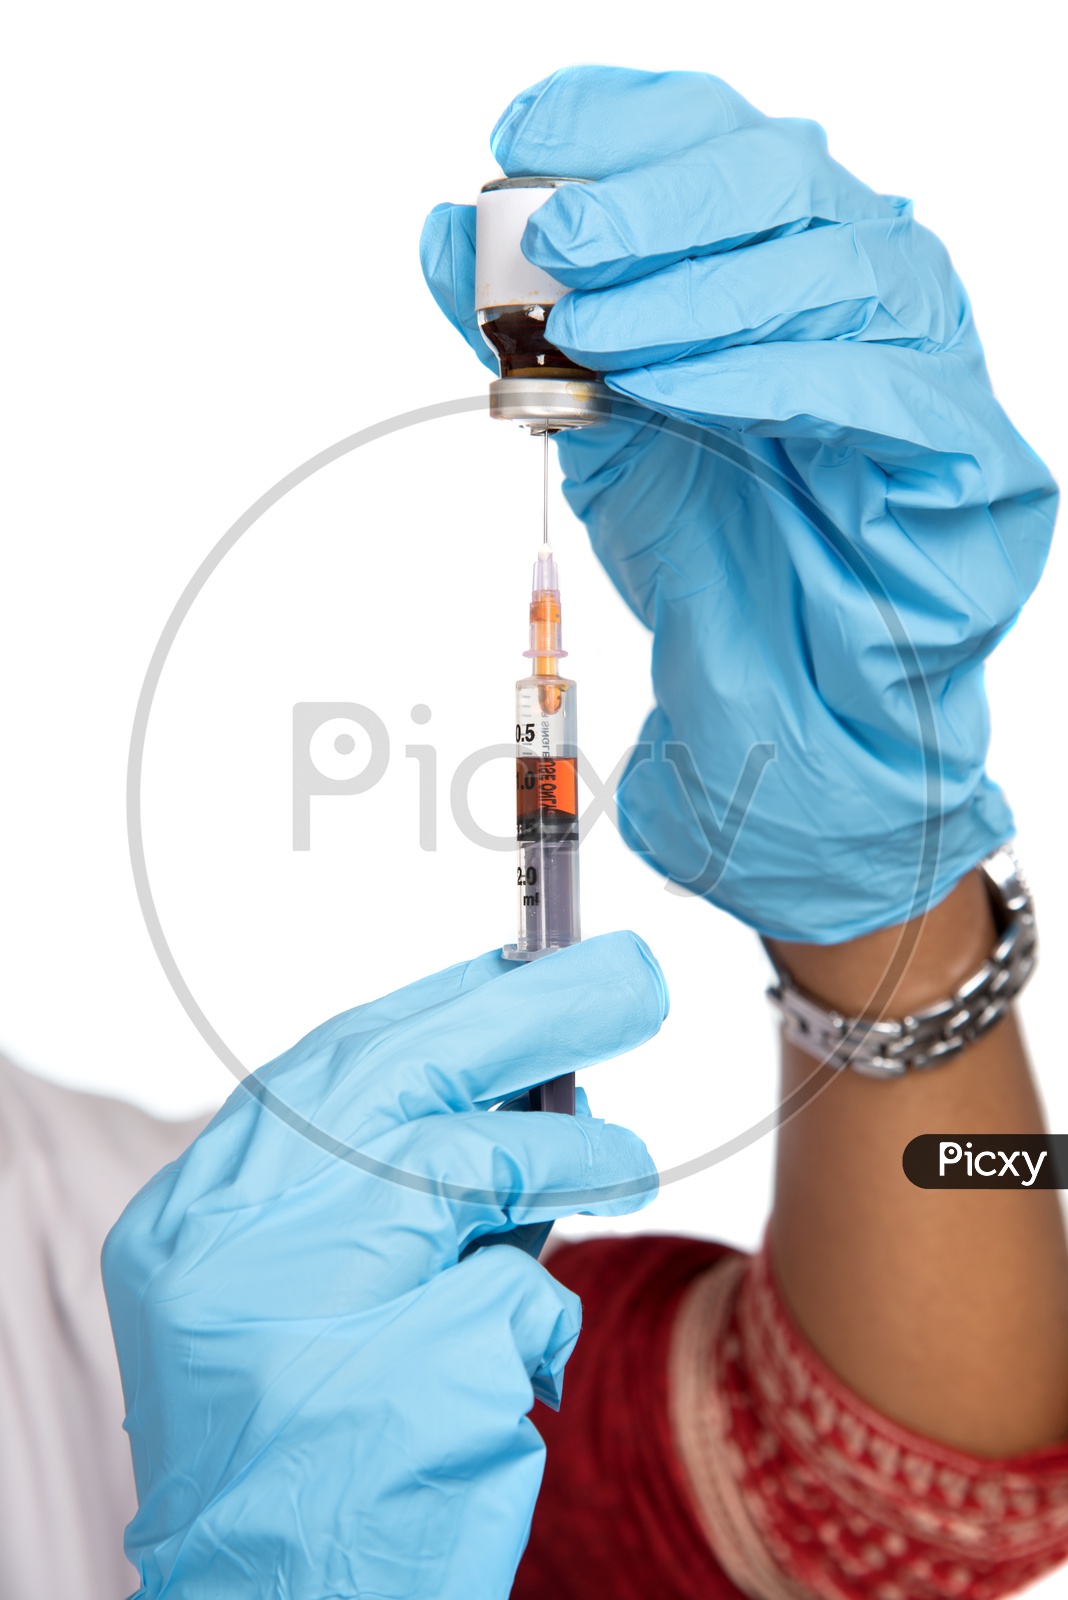 Indian Female Doctor loading a syringe from vial